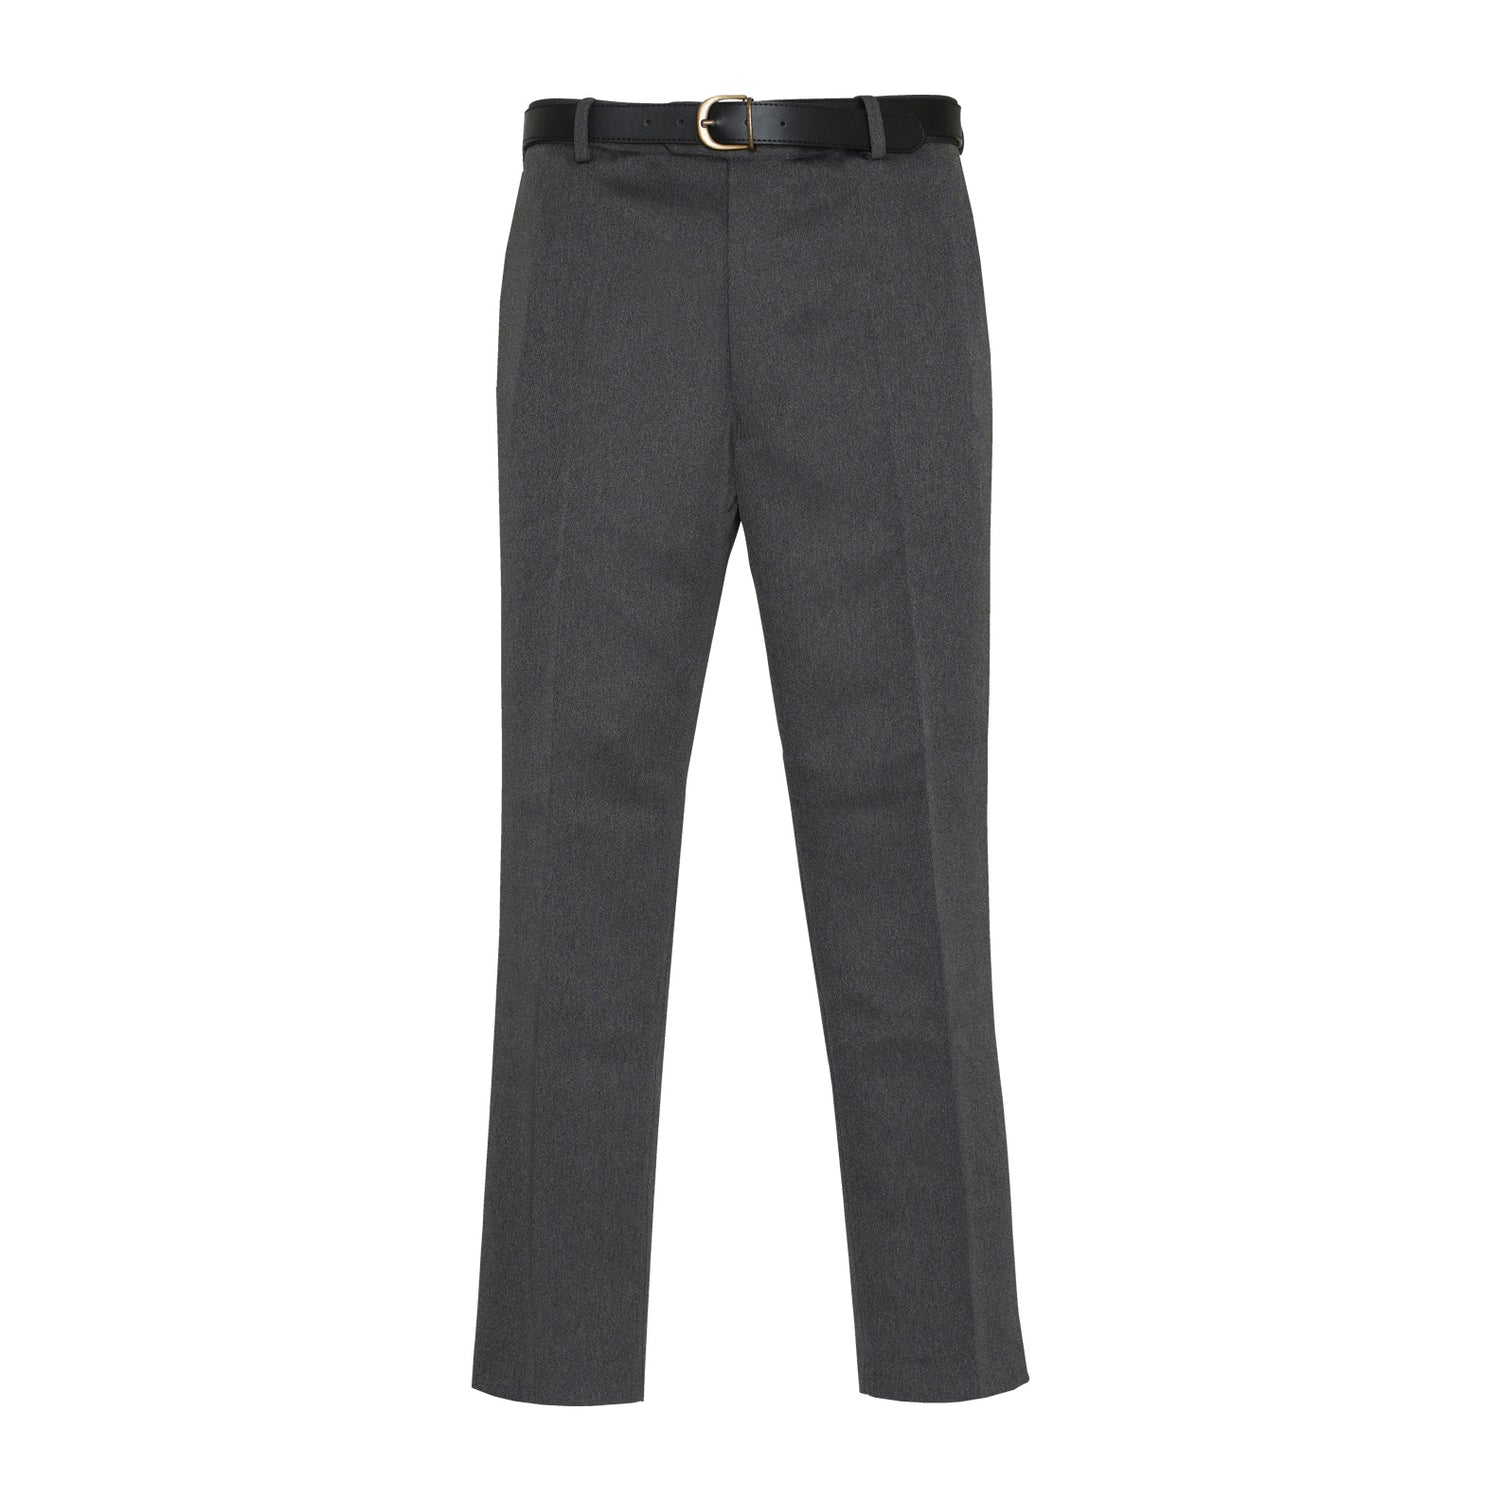 Mens Fully Elasticated Pull On Trousers - Care Clothing